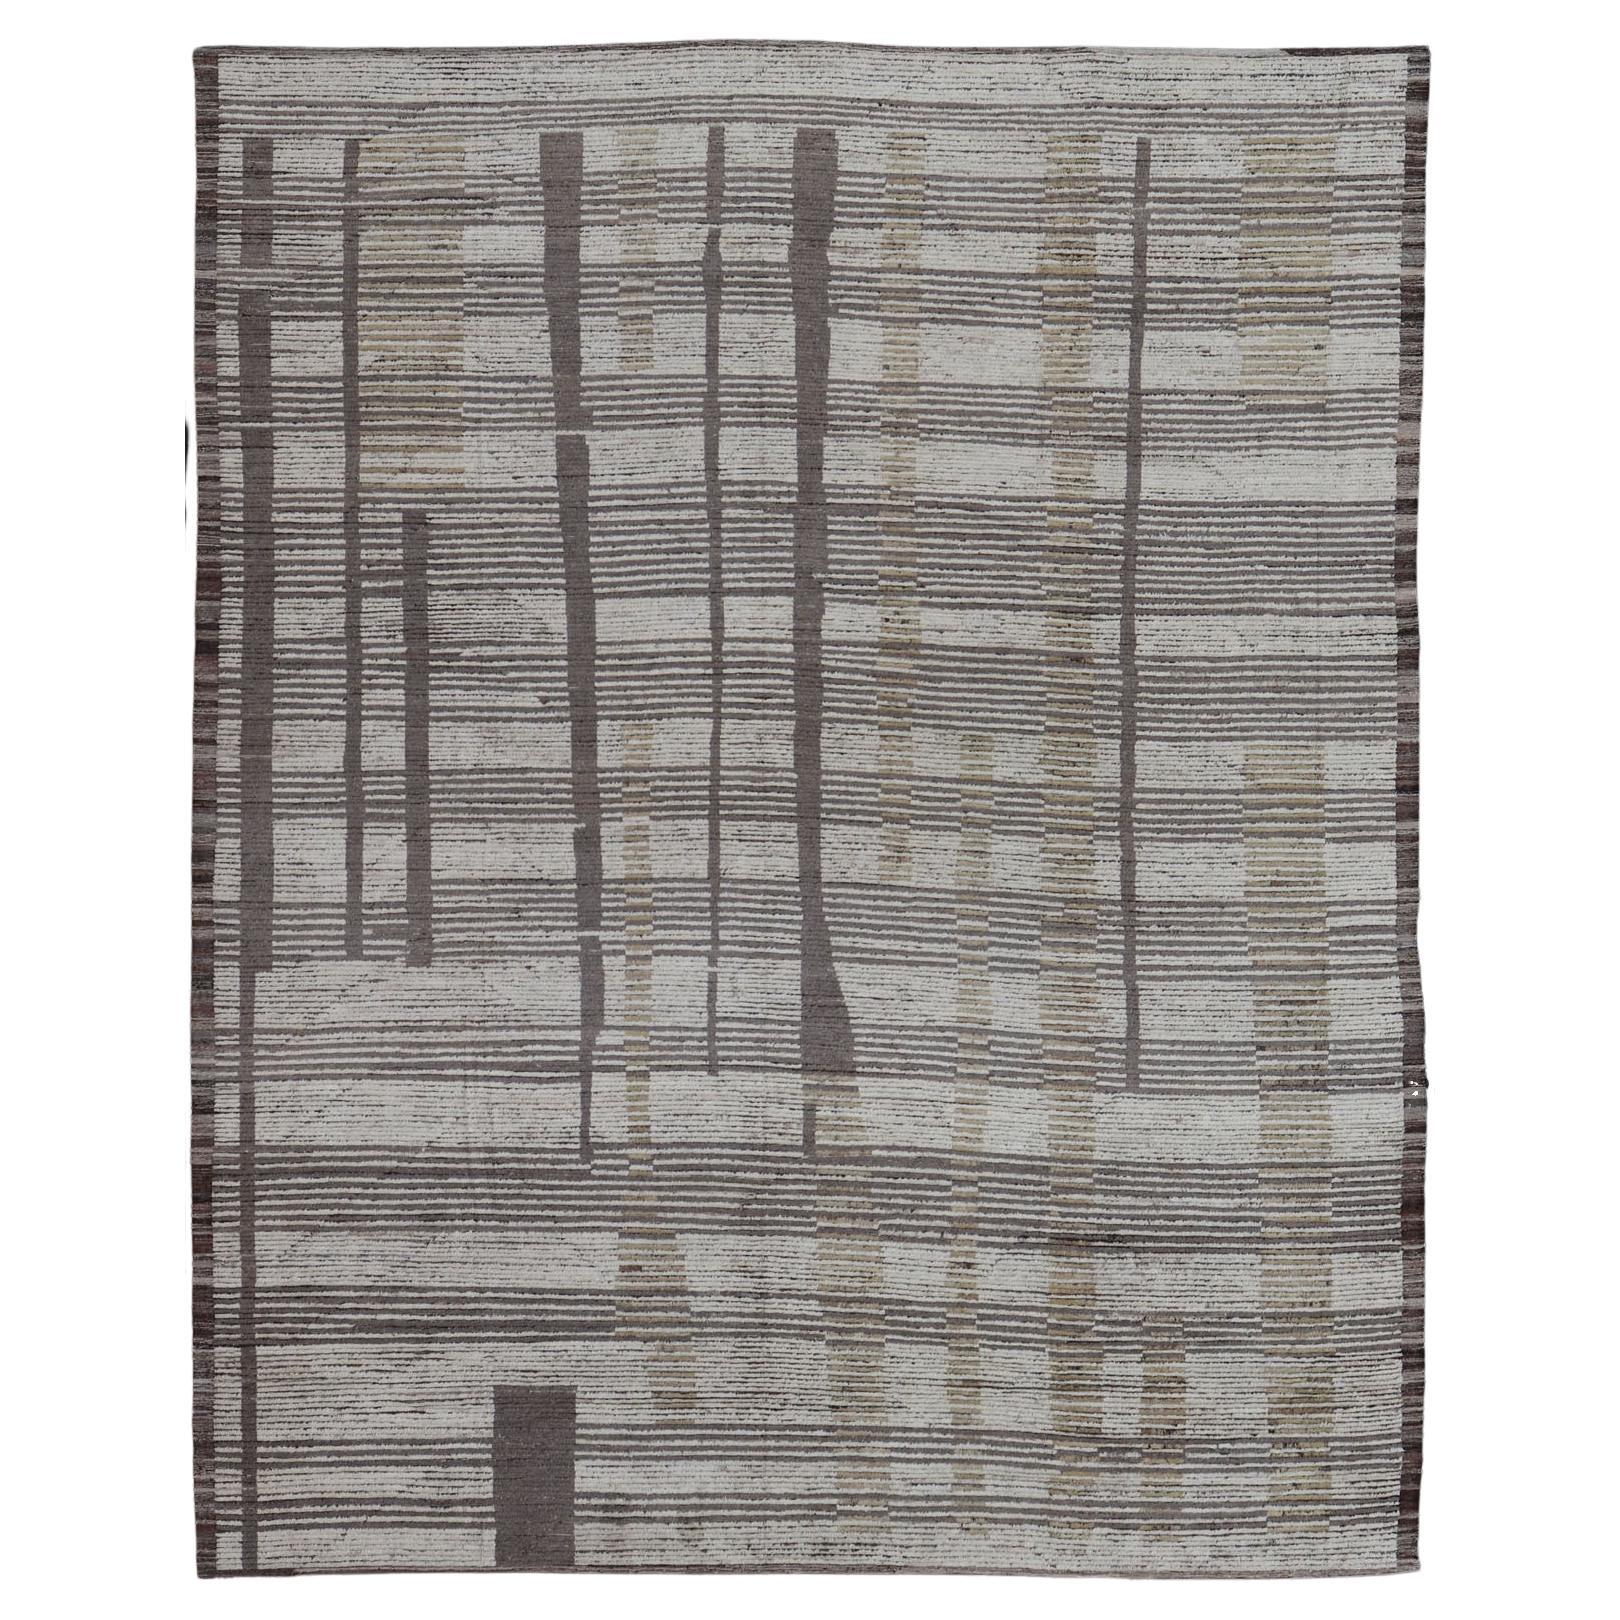 Oversized Afghan Modern Casual Abstract Rug in Muted Earthy Tones